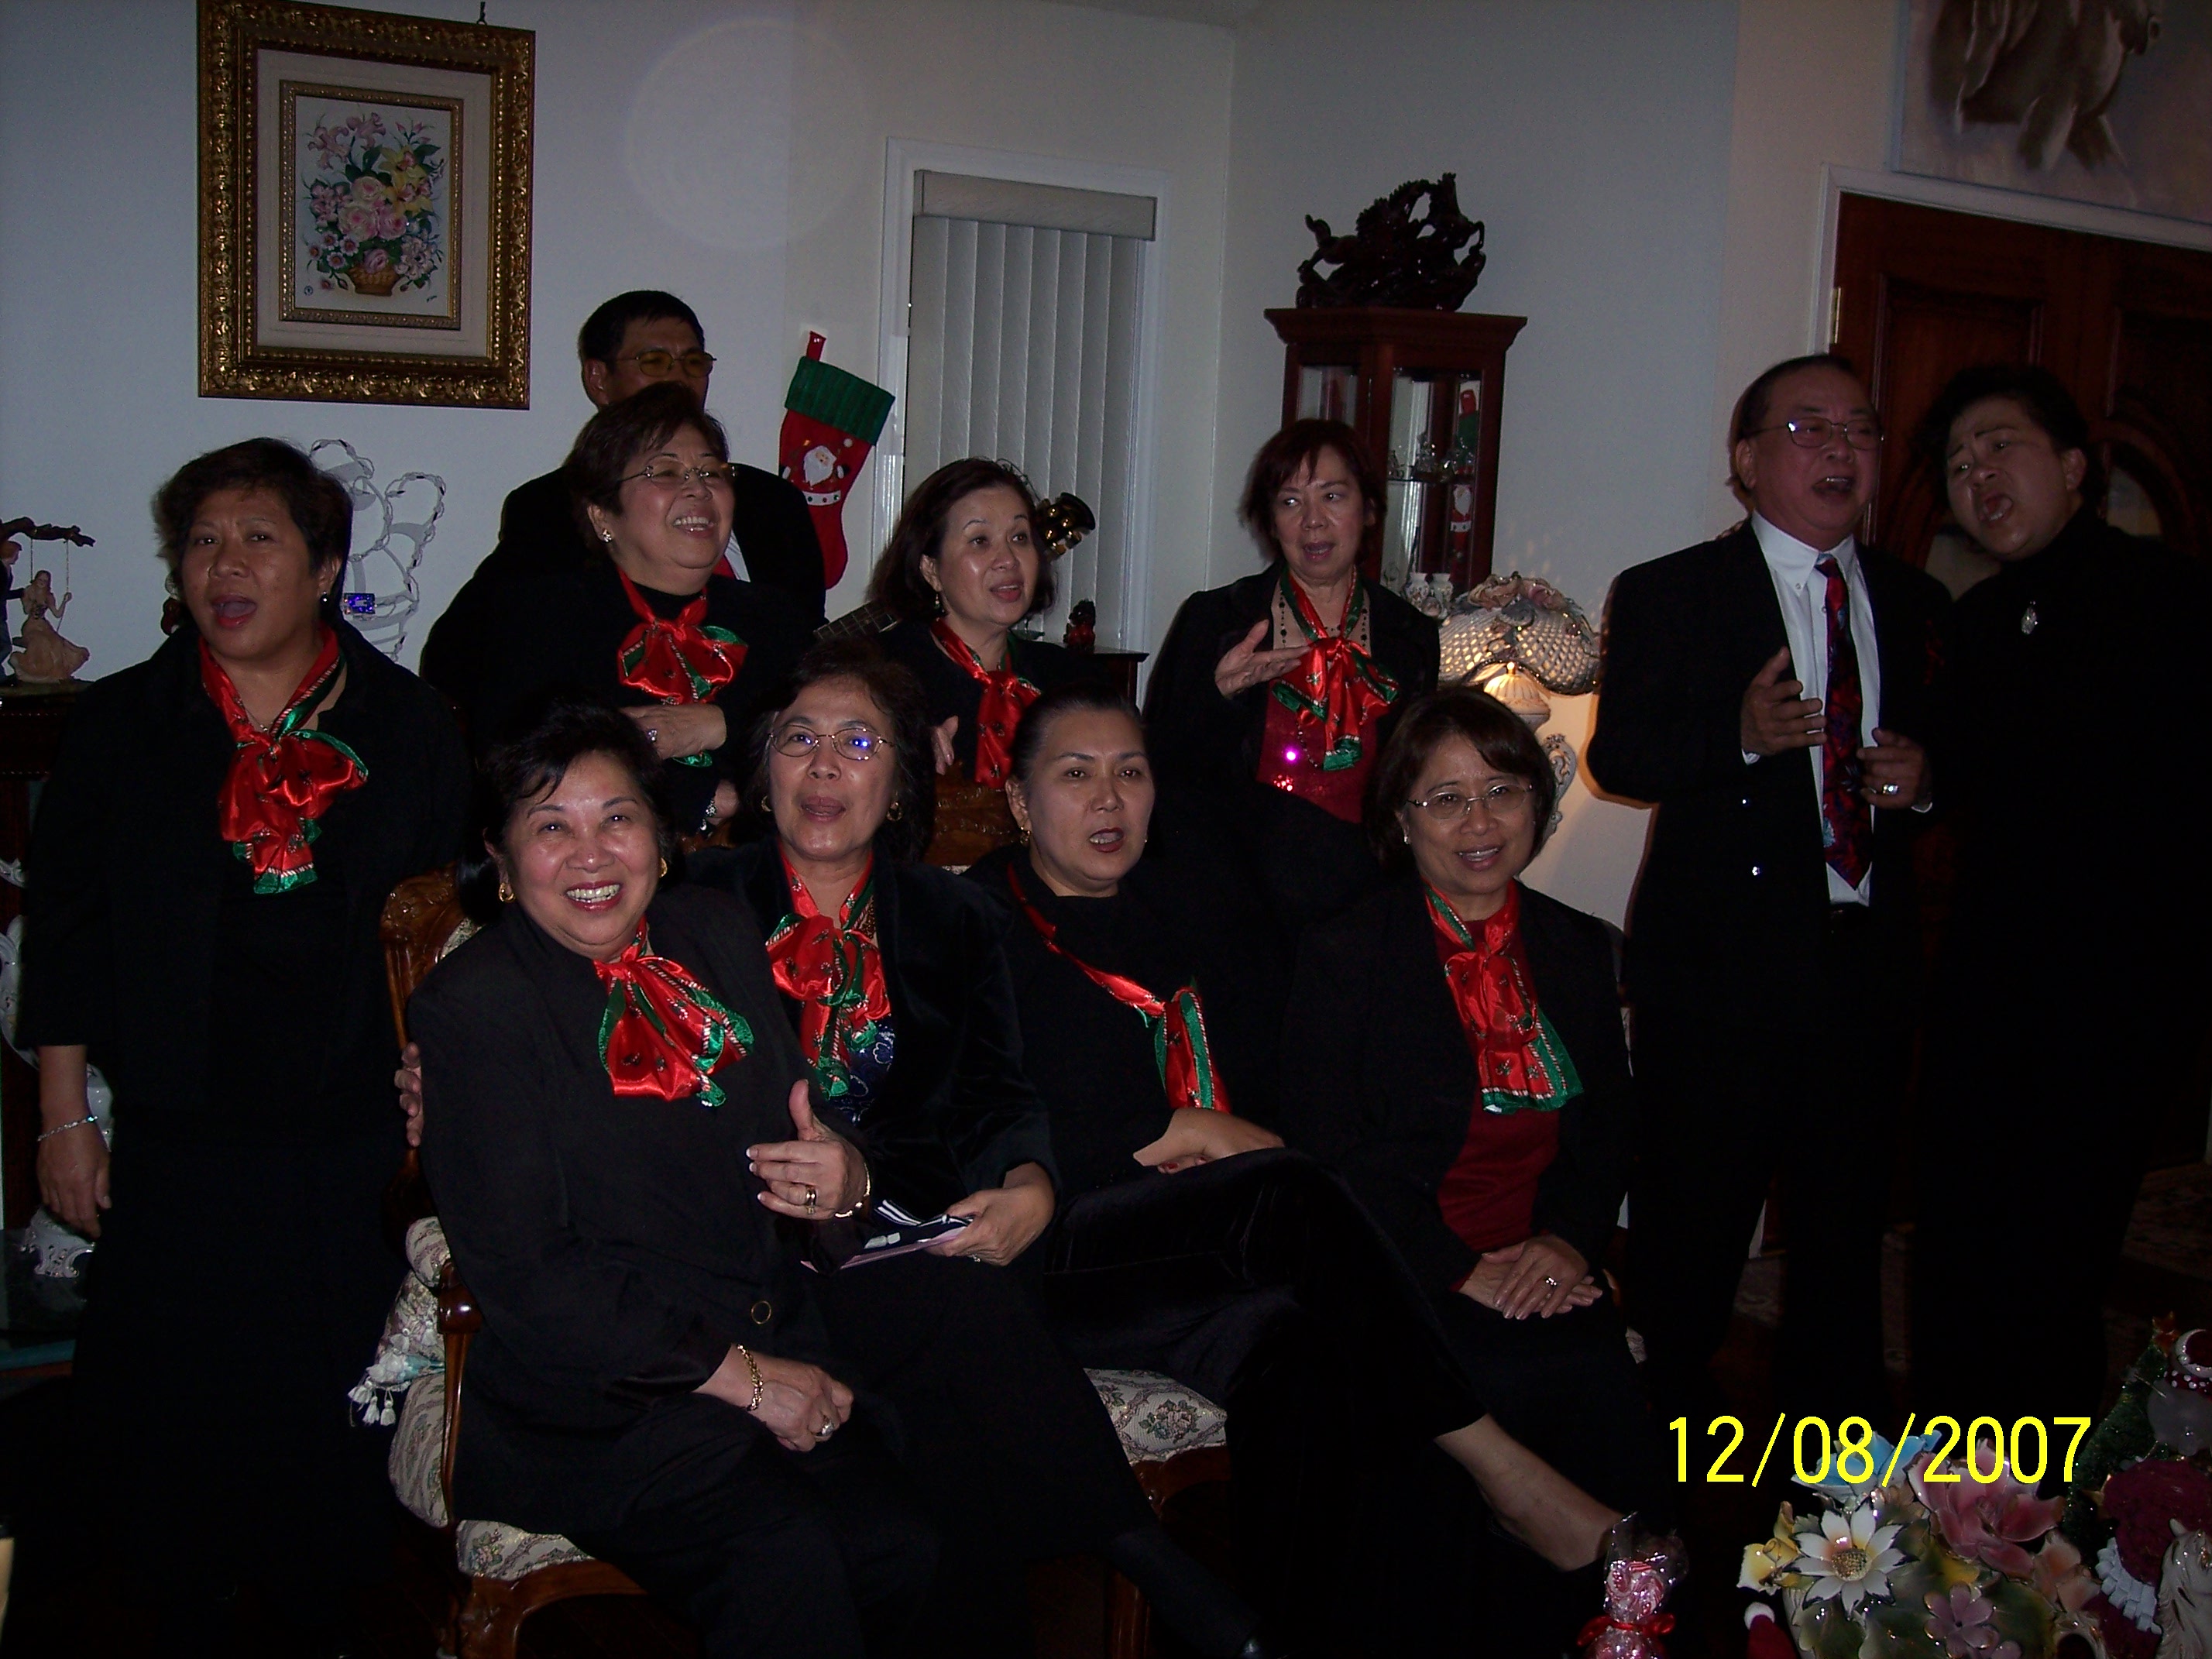 Elsie and Rudy doing a harana duet at Ed Cleofe's house on 12/8/07 in Mission Viejo.